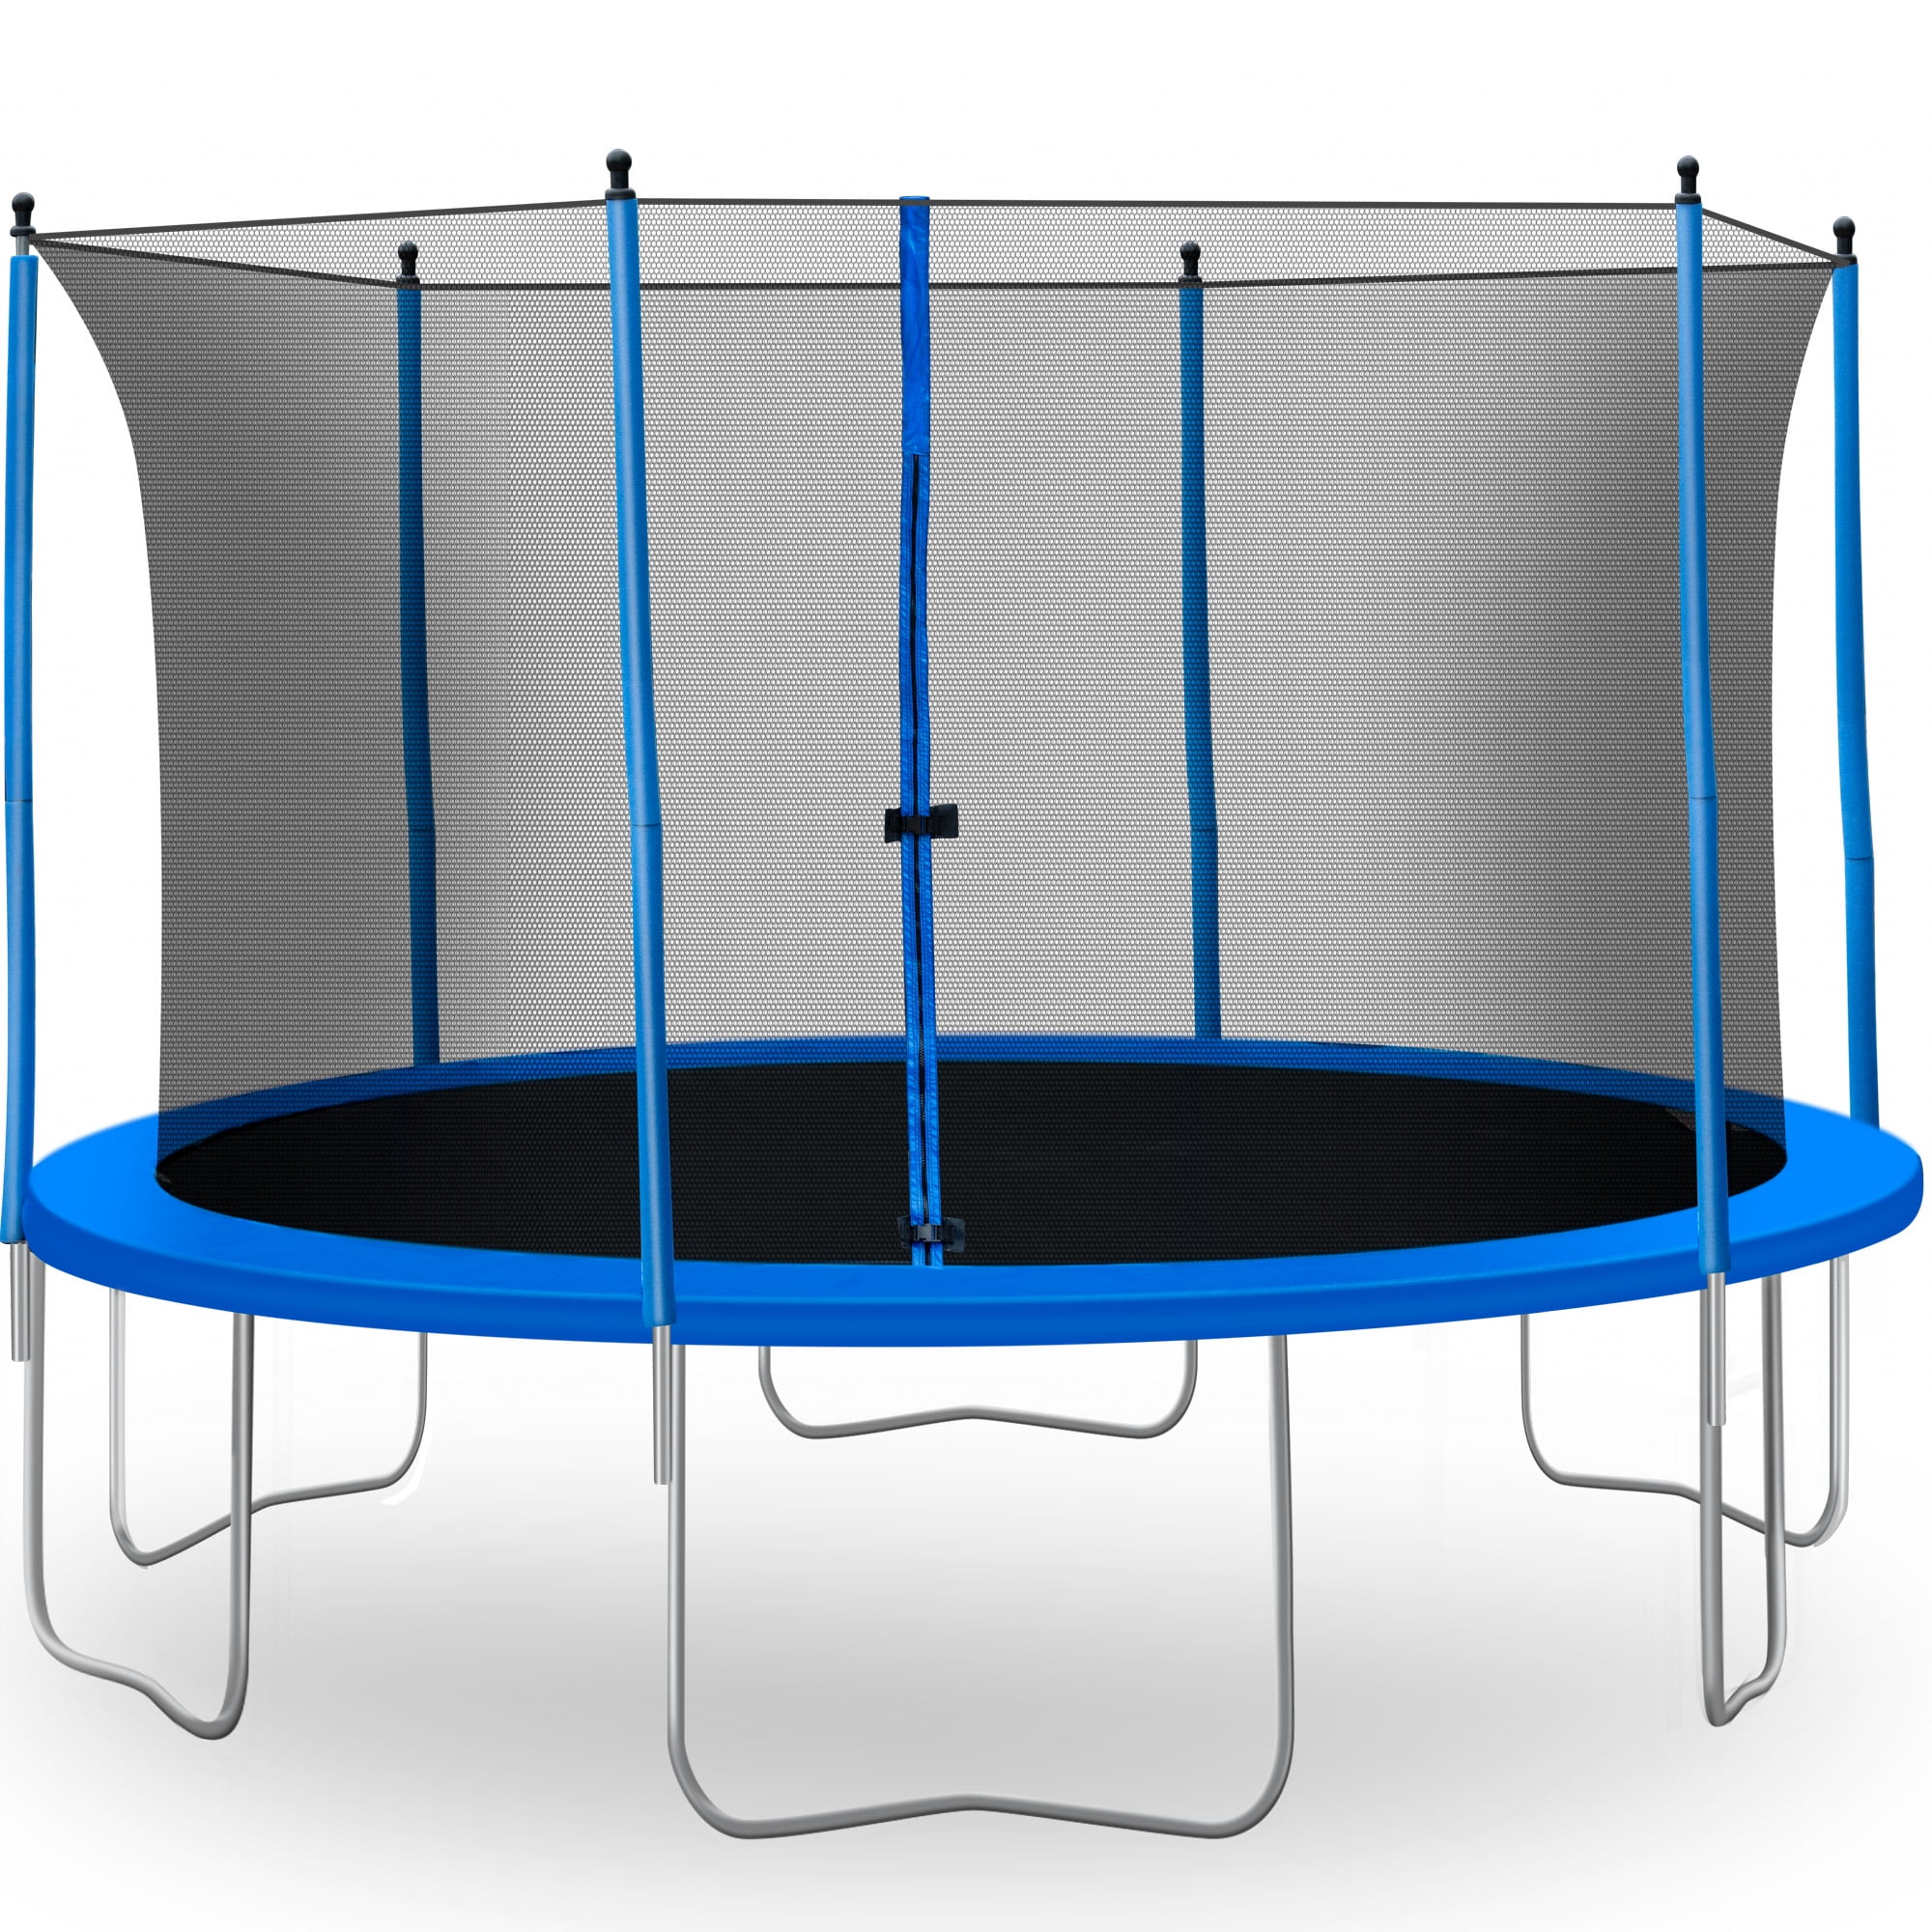 UHOMEPRO 13FT Round Trampoline, Outdoor Trampoline for Kids with Safety Enclosure Net, 72 Springs, Steel Tube, Circular Trampolines Outdoor Parkside for Kids, Family Jumping Trampoline, Q16243